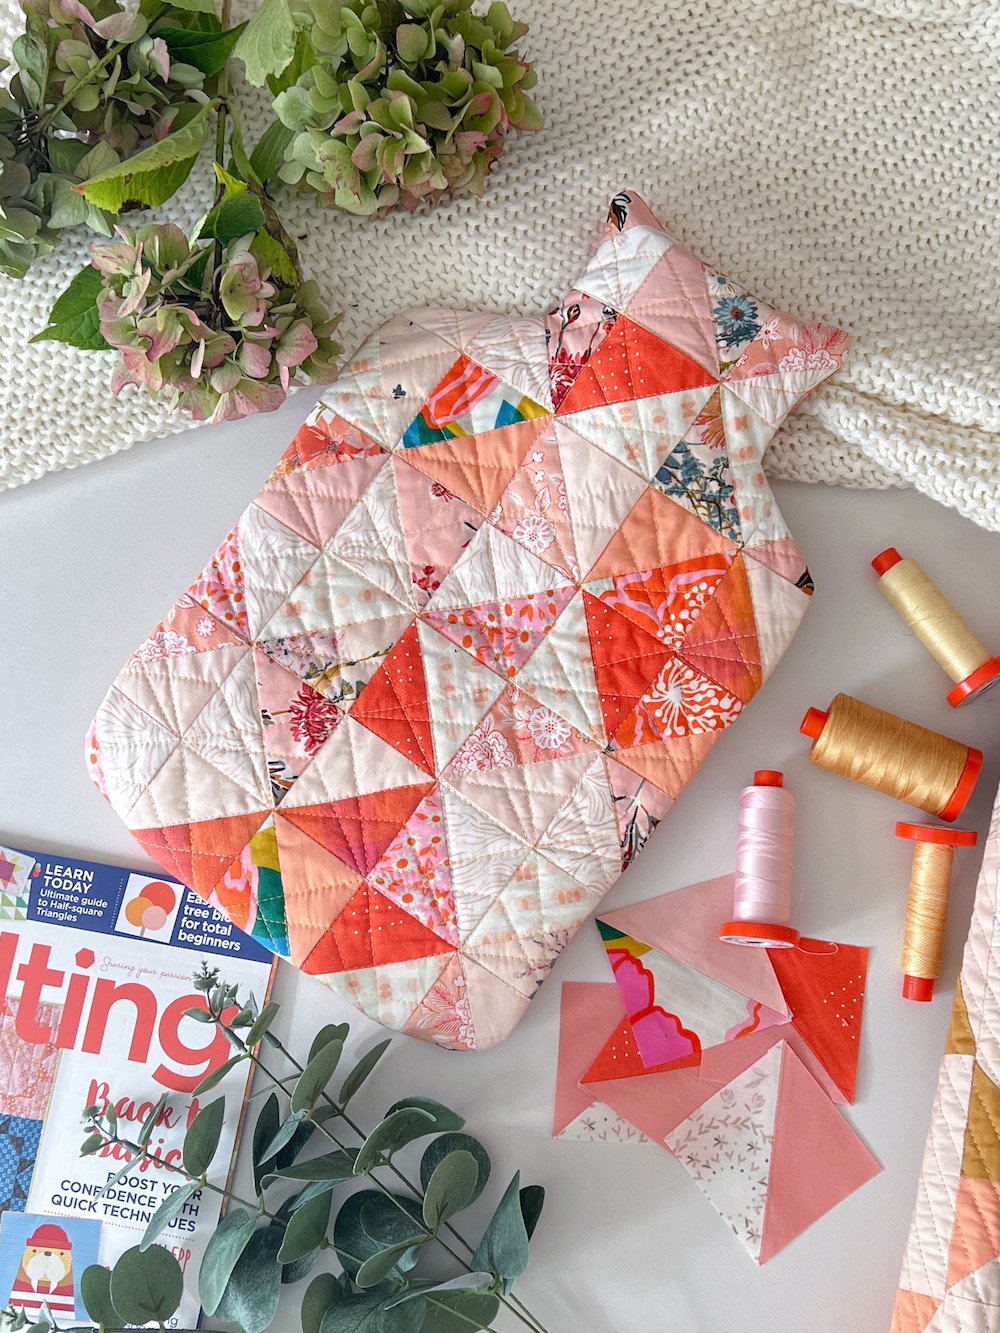 How to make a Quilted Hot-Water bottle cover! — MADE JUST SEW